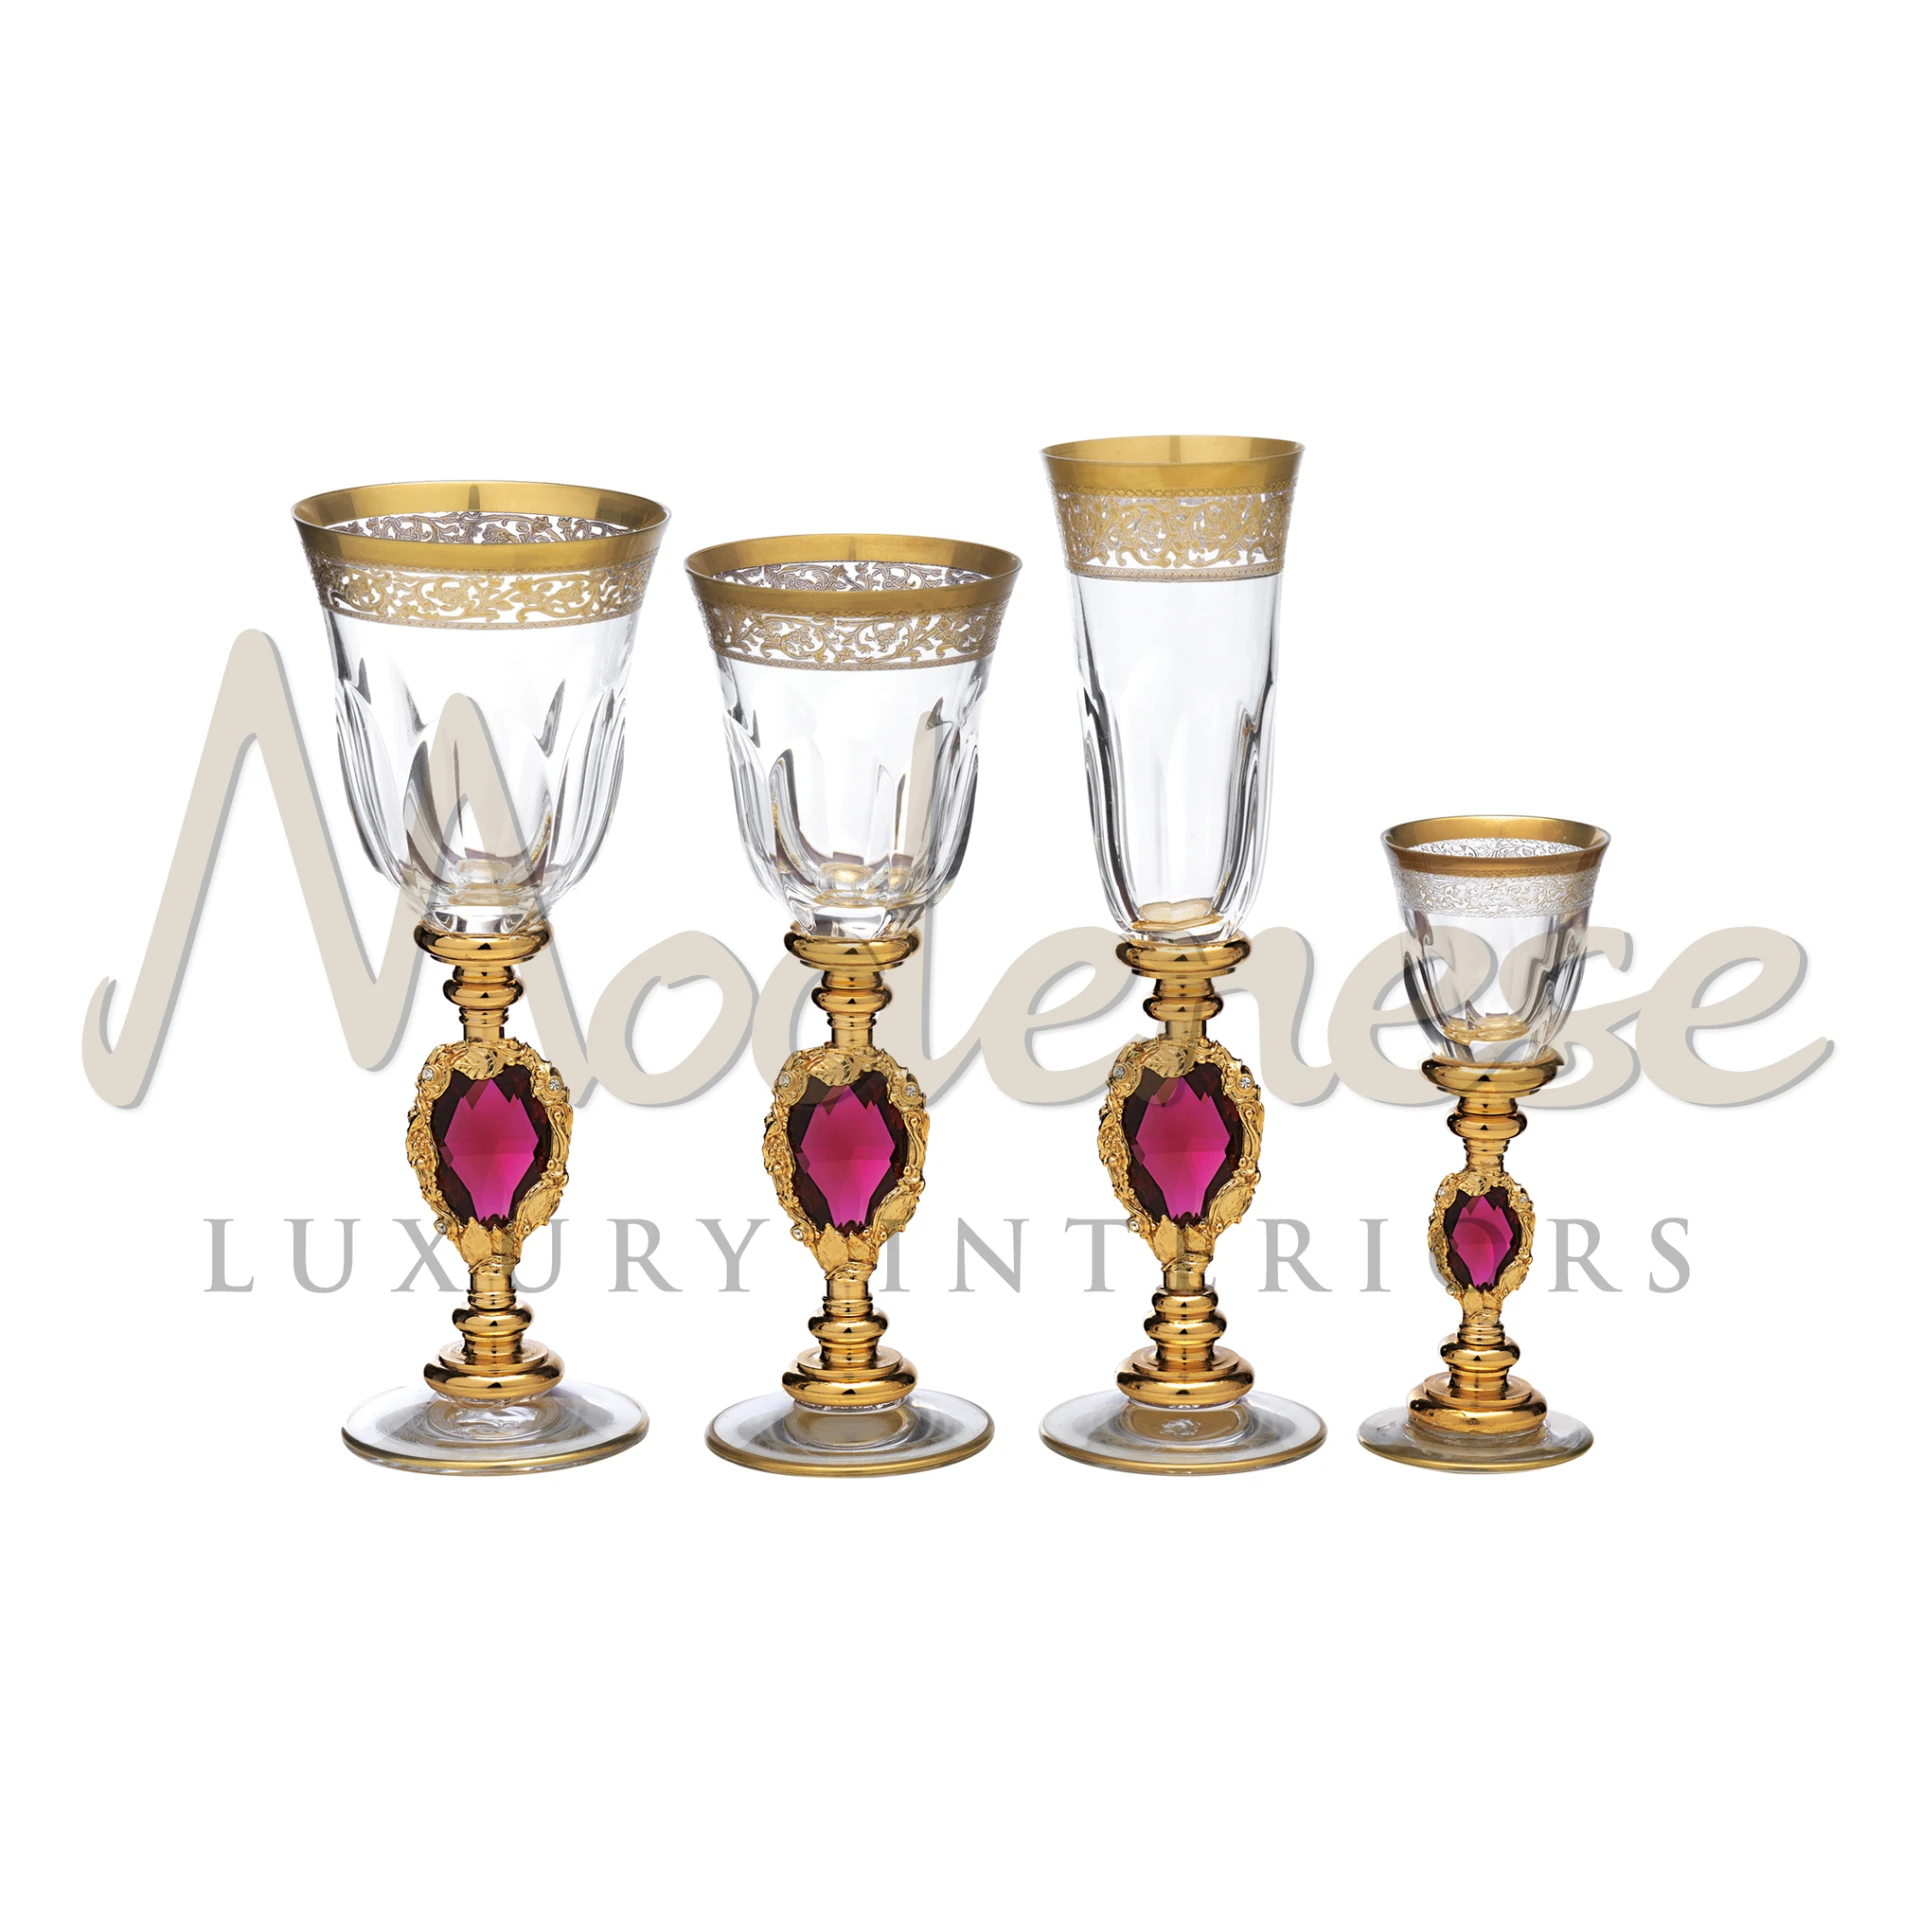 Luxury 'Ruby Crystal' glassware collection with gold accents and rich ruby gemstone